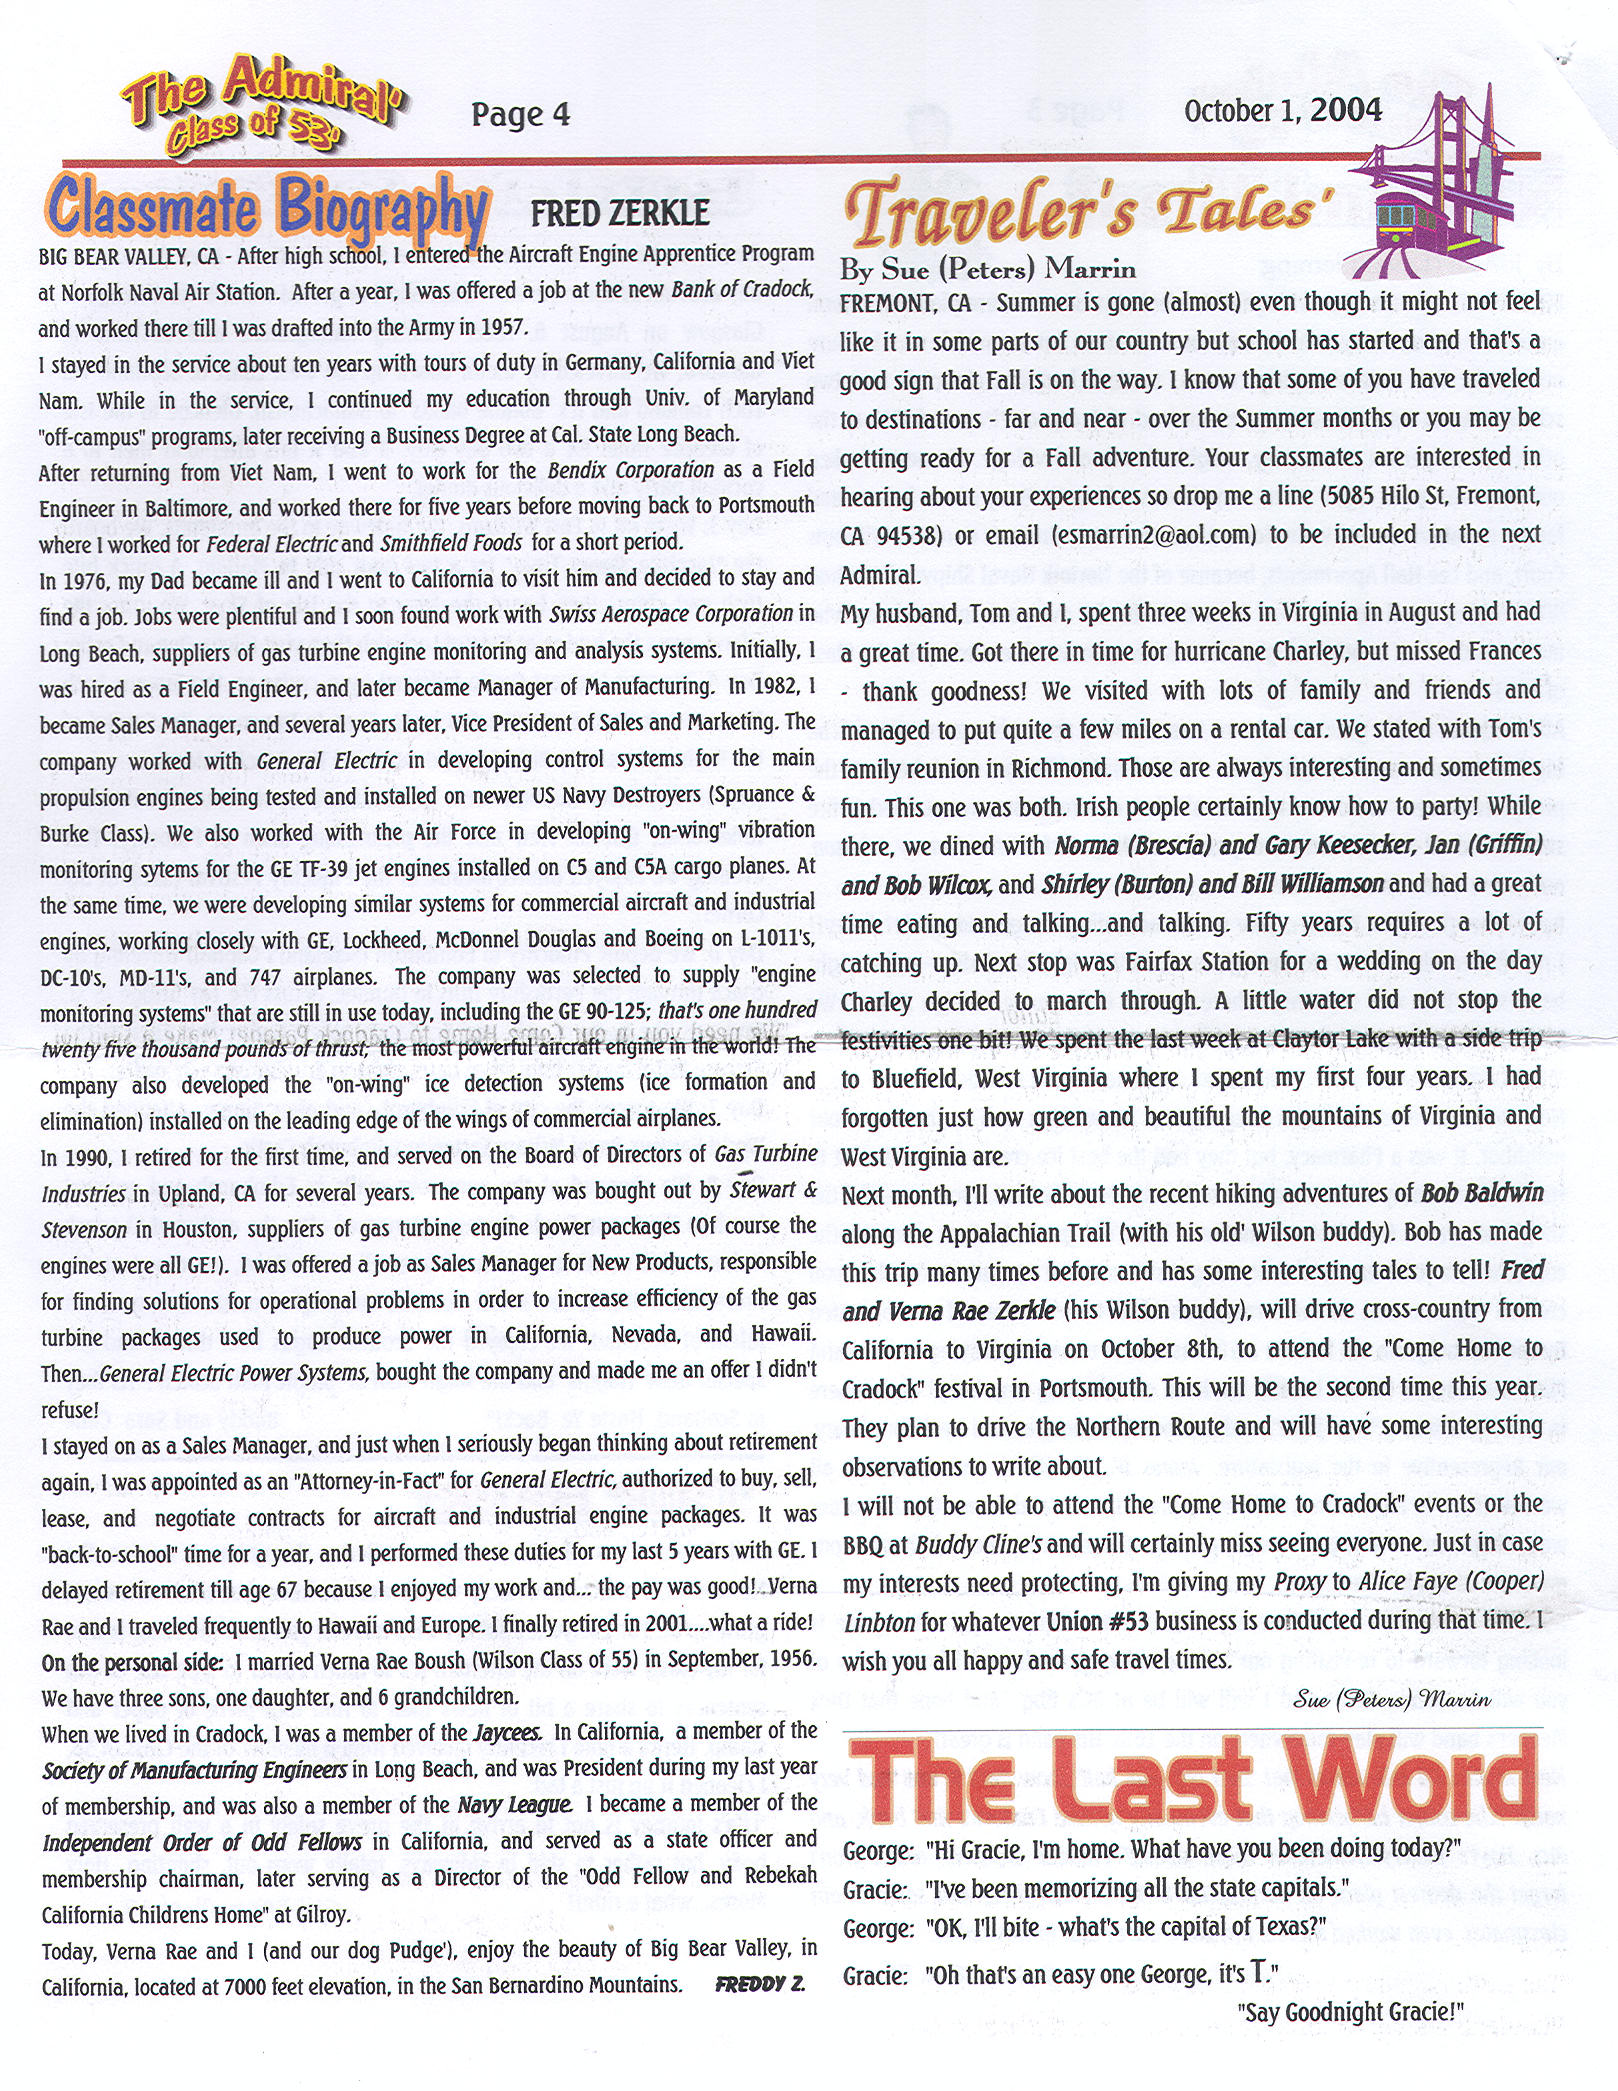 The Admiral - October 2004 - pg. 4